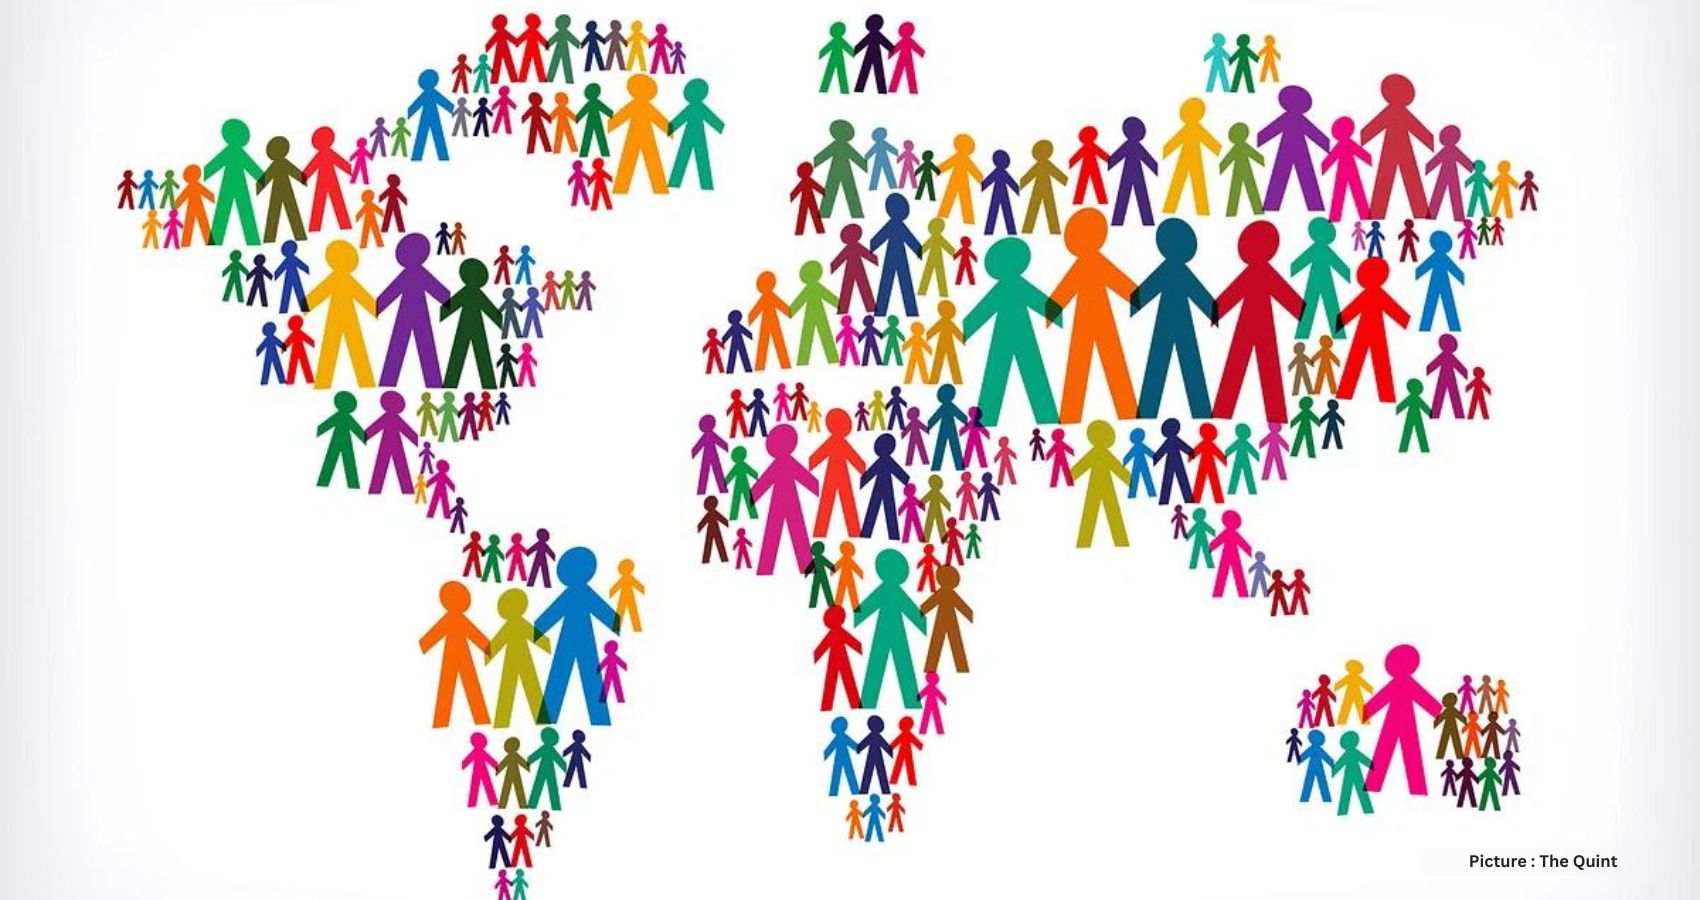 World Population Day Reflects on the Global Dynamics of Rapid Growth and Shrinking Concerns